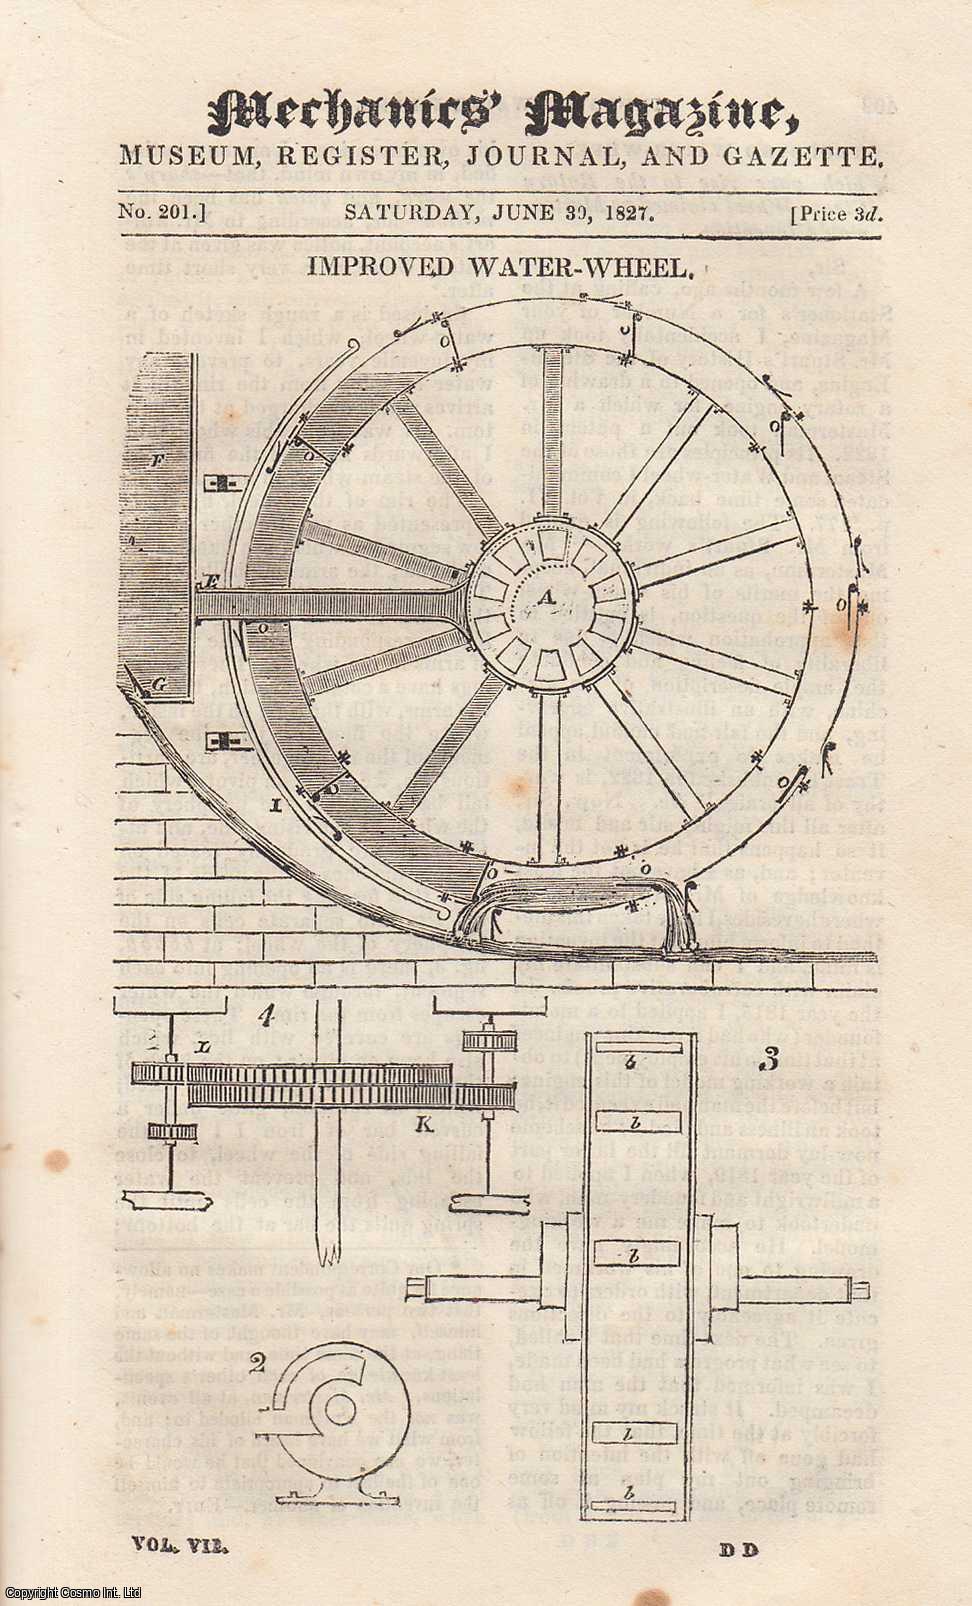 MECHANICS MAGAZINE - Application of Ballooning to The Exploration of The Polar Seas, Improved Water-Wheel; Smoky Chimneys; Warping Boats up Rapids; Hydraulics (2); Self-Generating Gas Lamp, etc. Mechanics Magazine, Museum, Register, Journal and Gazette. Issue No. 201. A complete rare weekly issue of the Mechanics' Magazine, 1827.